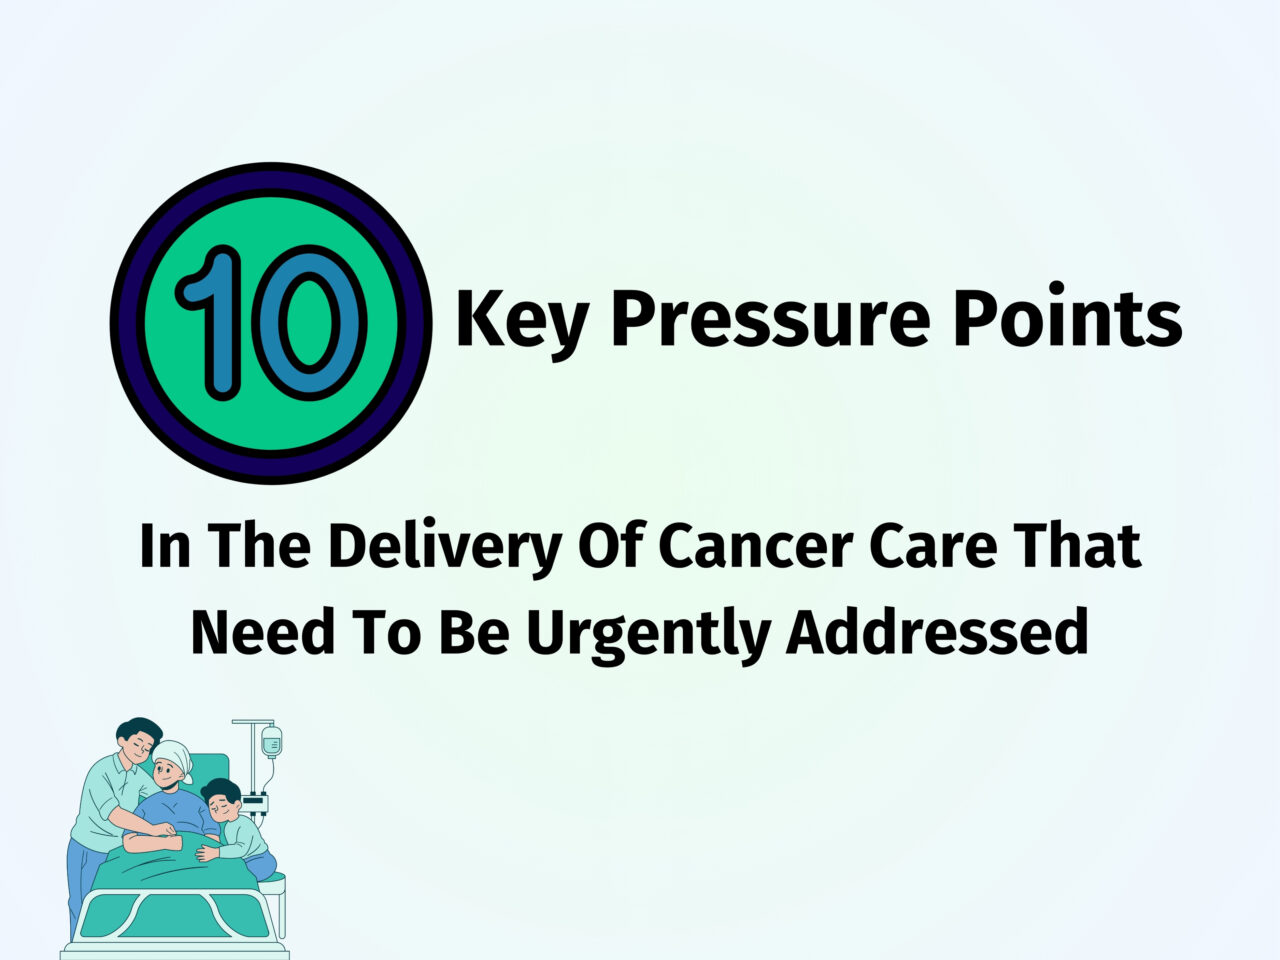 Elisa Agostinetto: 10 key pressure points in the delivery of cancer care that need to be urgently addressed